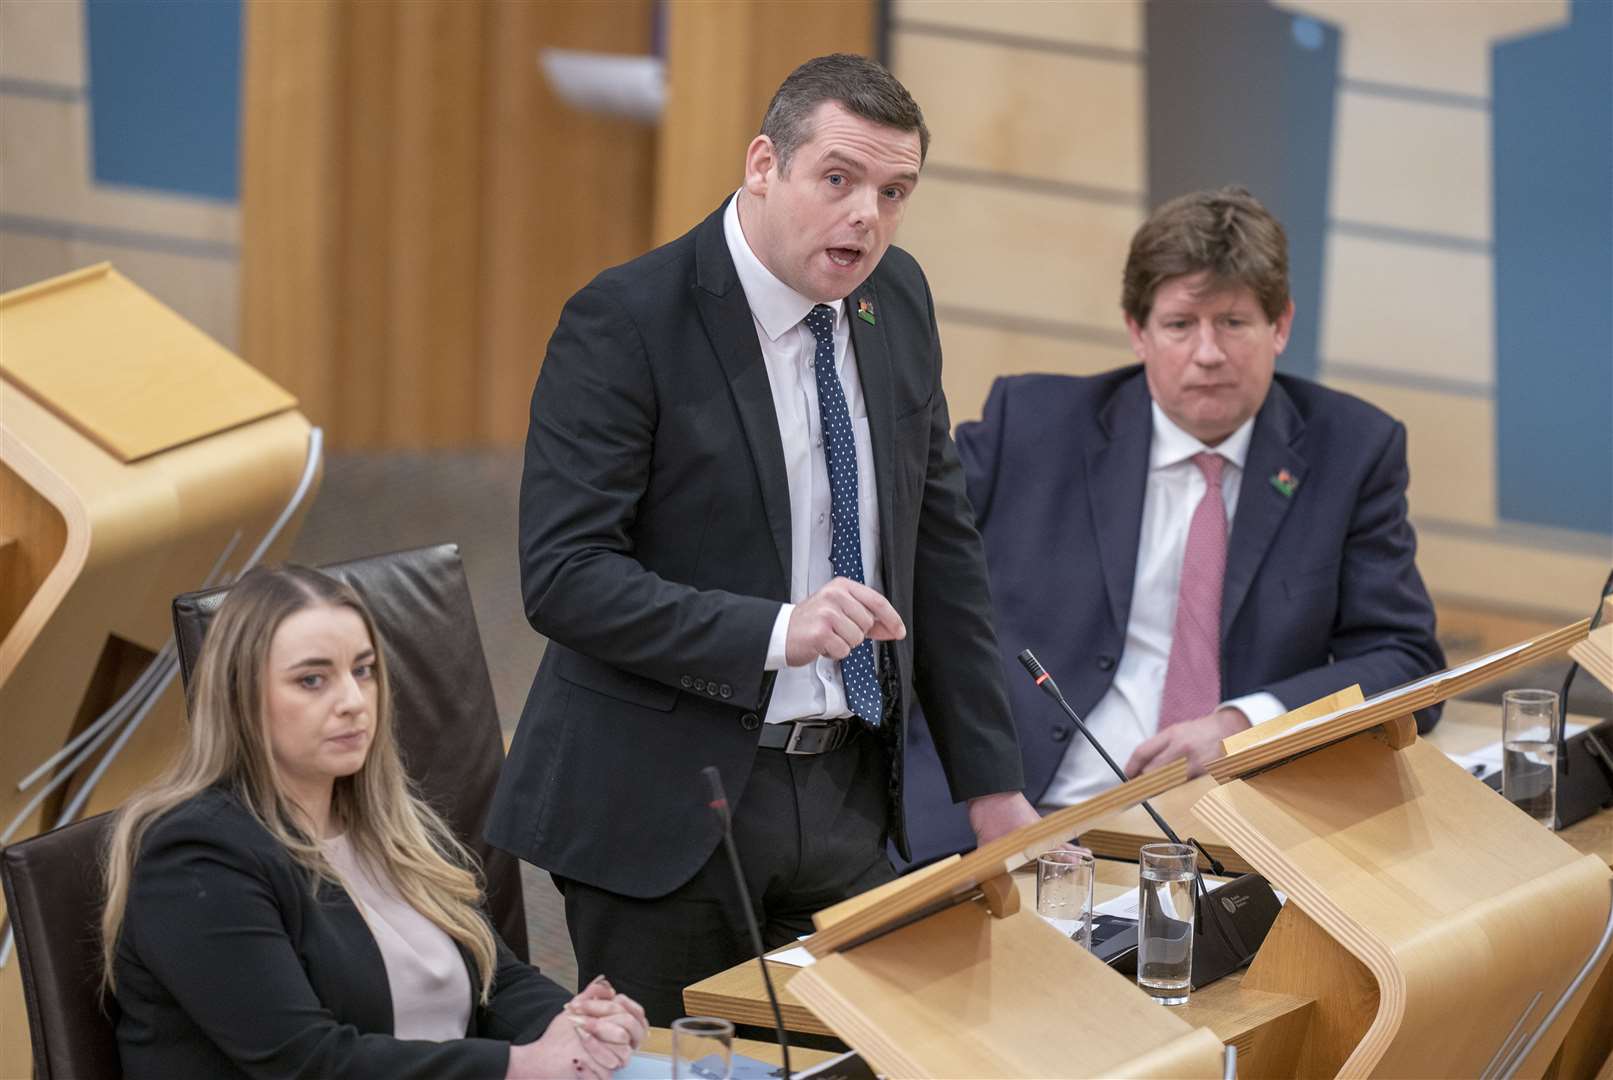 Douglas Ross said he believes the ministers deliberately misled the Scottish Parliament (Jane Barlow/PA)